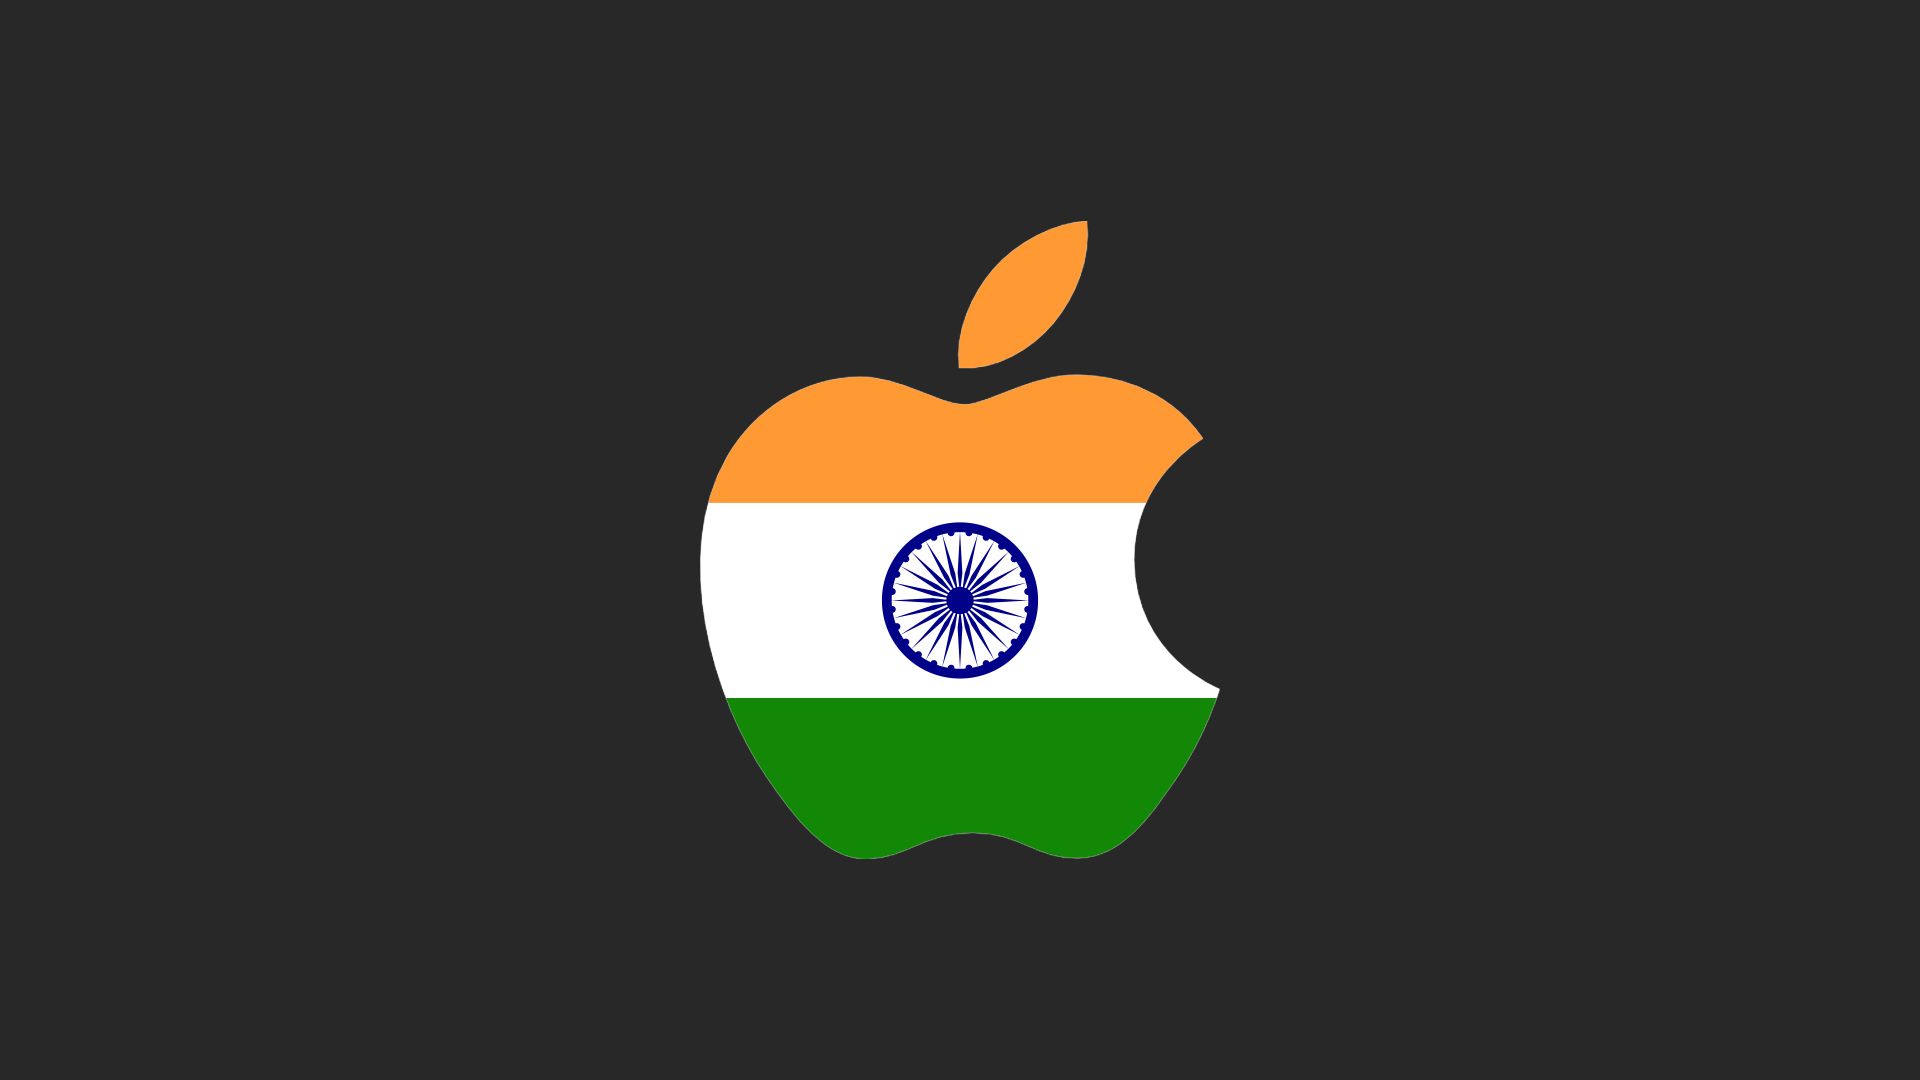 Amoled Indian Flag Wallpapers - Wallpaper Cave